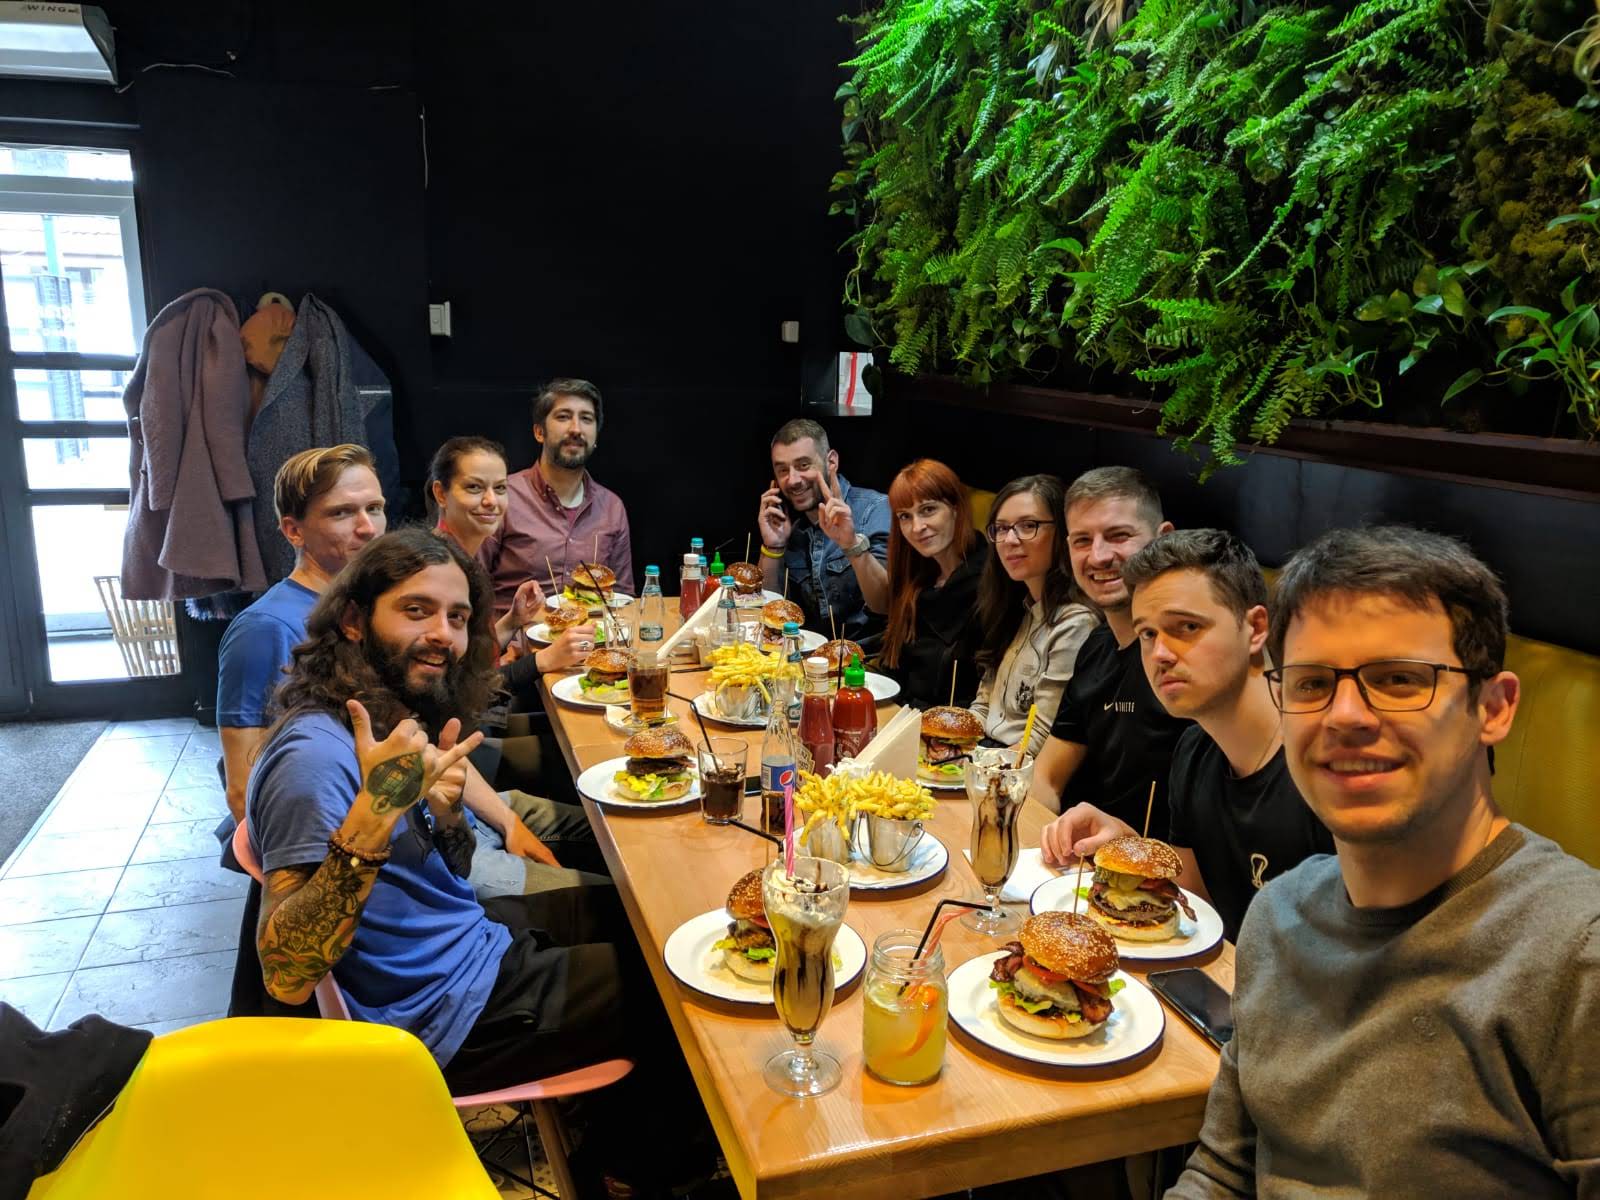 The Payments team back in 2019, when we went to Iasi in Romania for a team offsite. Jevgeni is taking the picture.